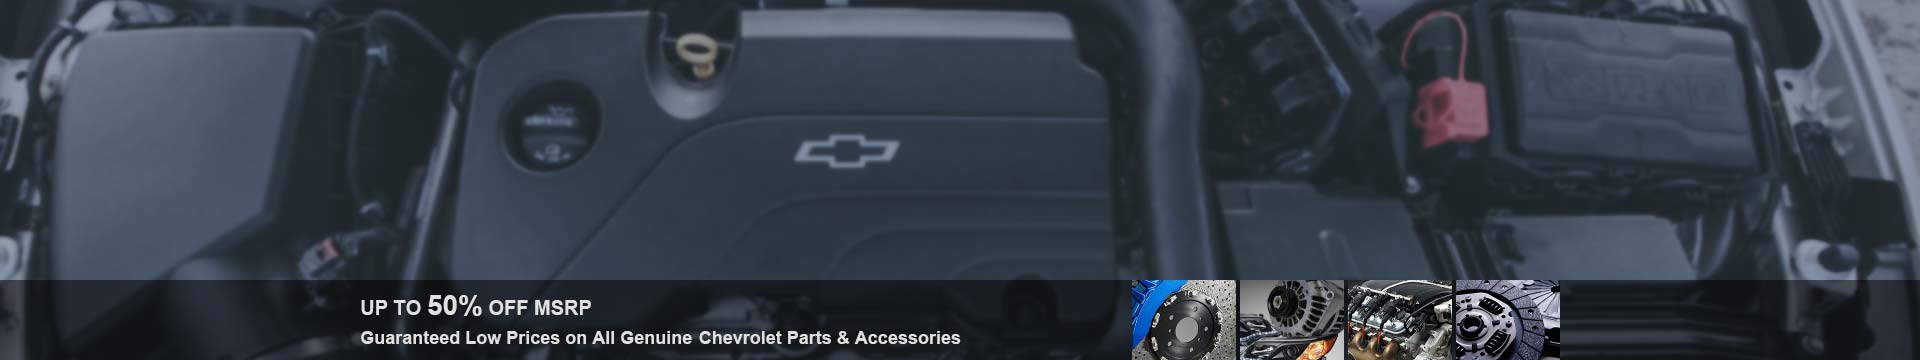 Guaranteed low prices on all Genuine Chevrolet Traverse parts